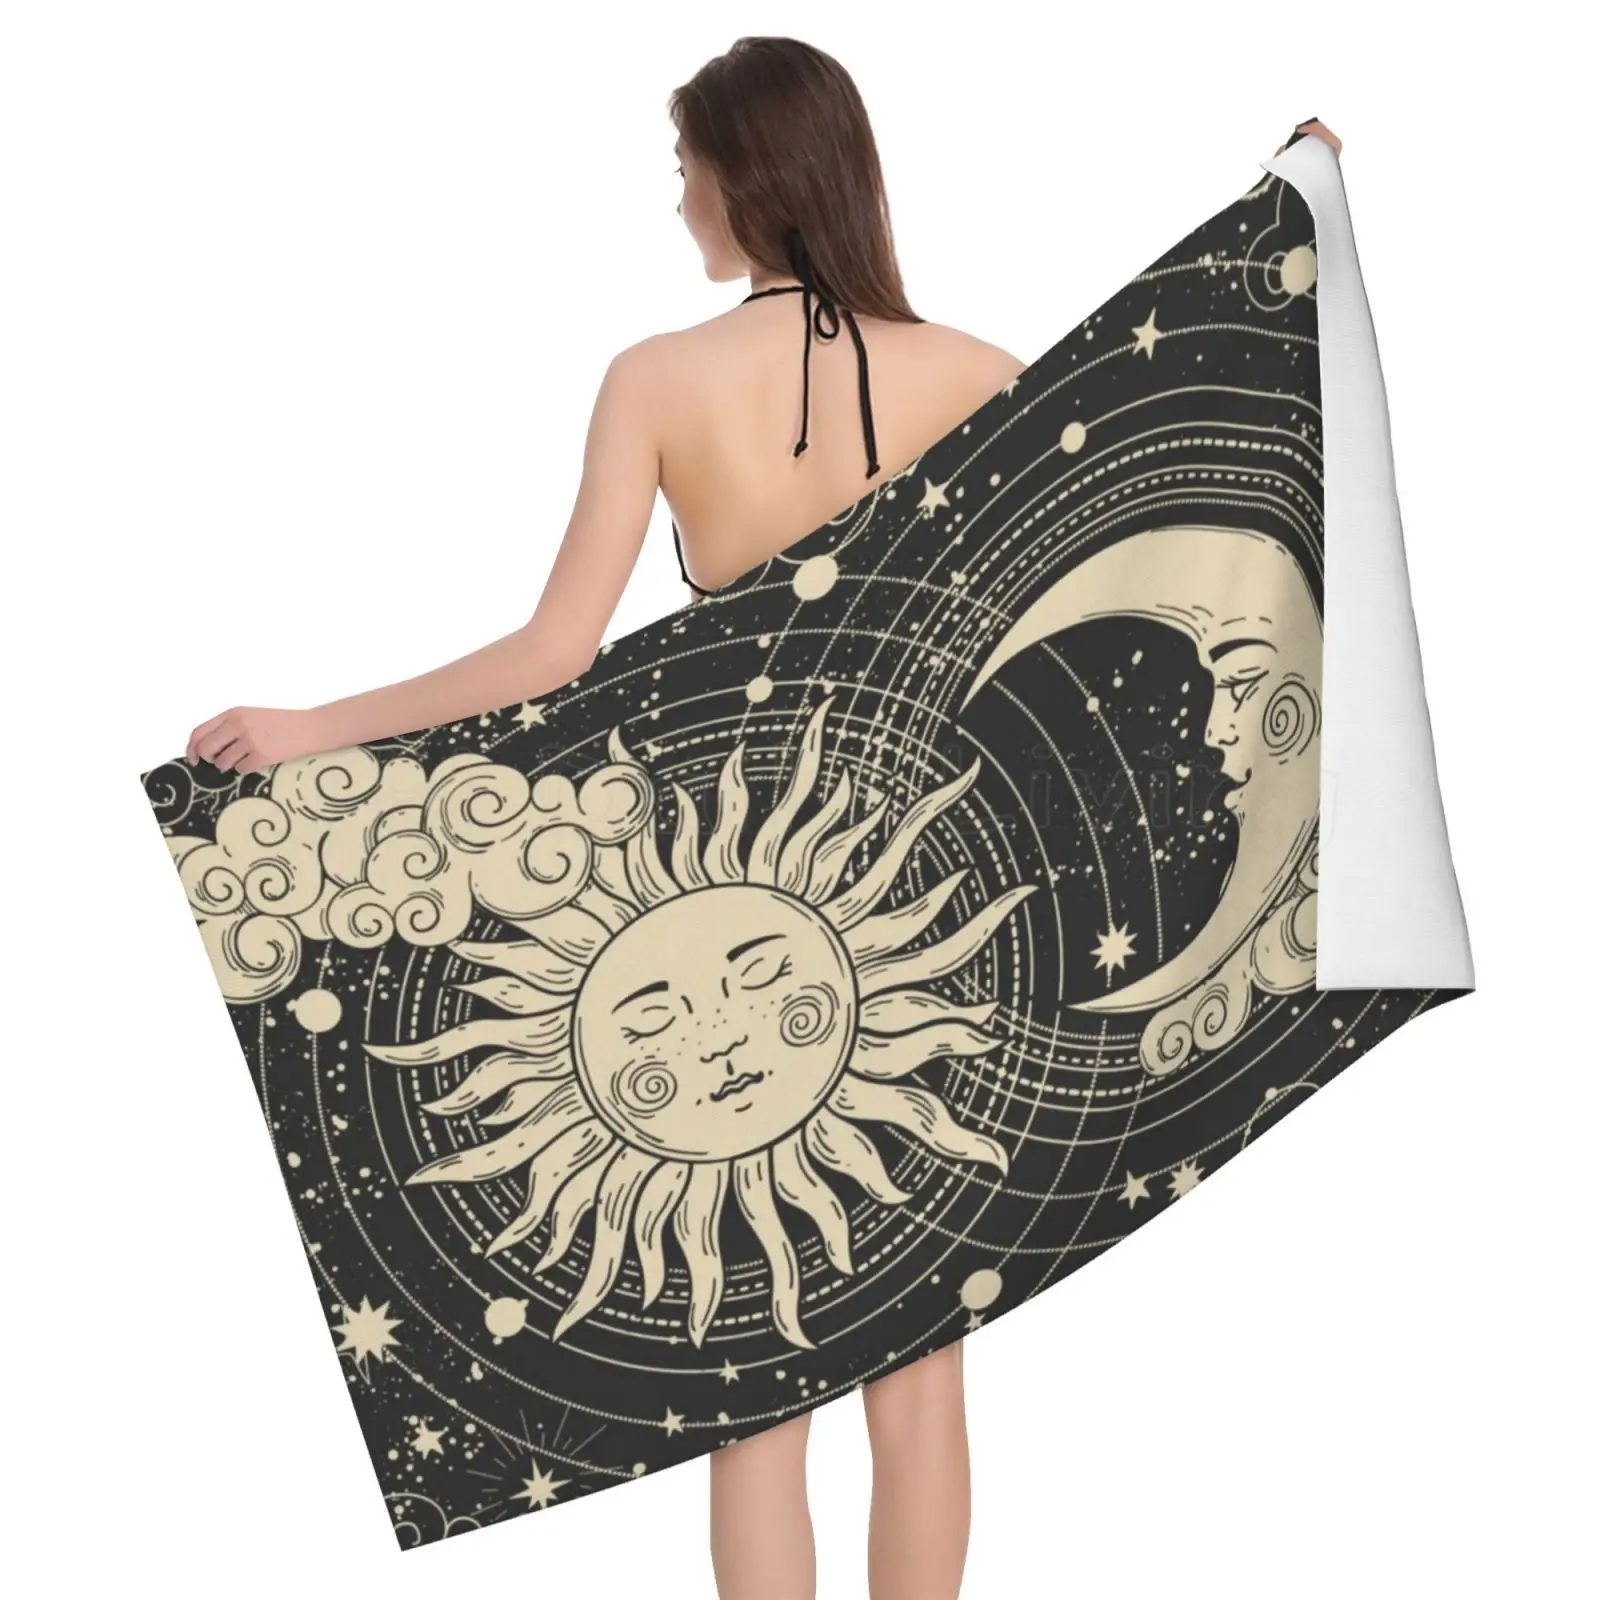 

Tarot Sun Moon Witchy Astrology Night Psychedelic Bath Towel Quick-Dry Beach Towel Soft Absorbent for Beach Gym Hotel Spa Sport